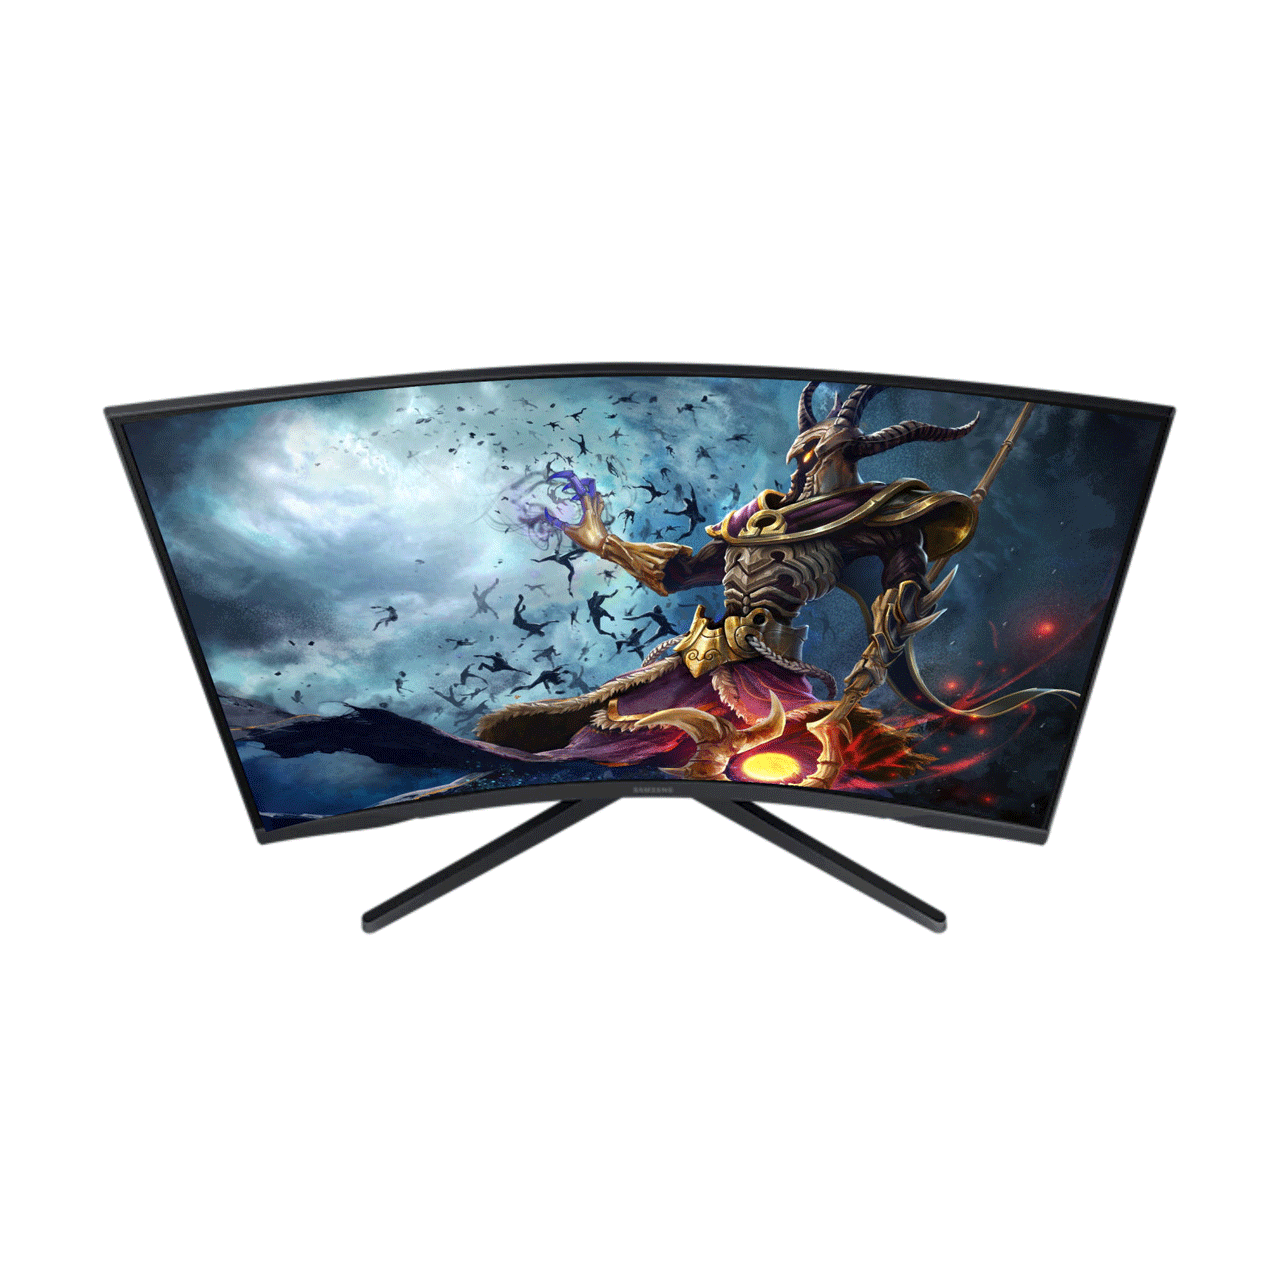 Samsung-LC27G55TQ-W-=-gaming-monitor,-size-27-inches